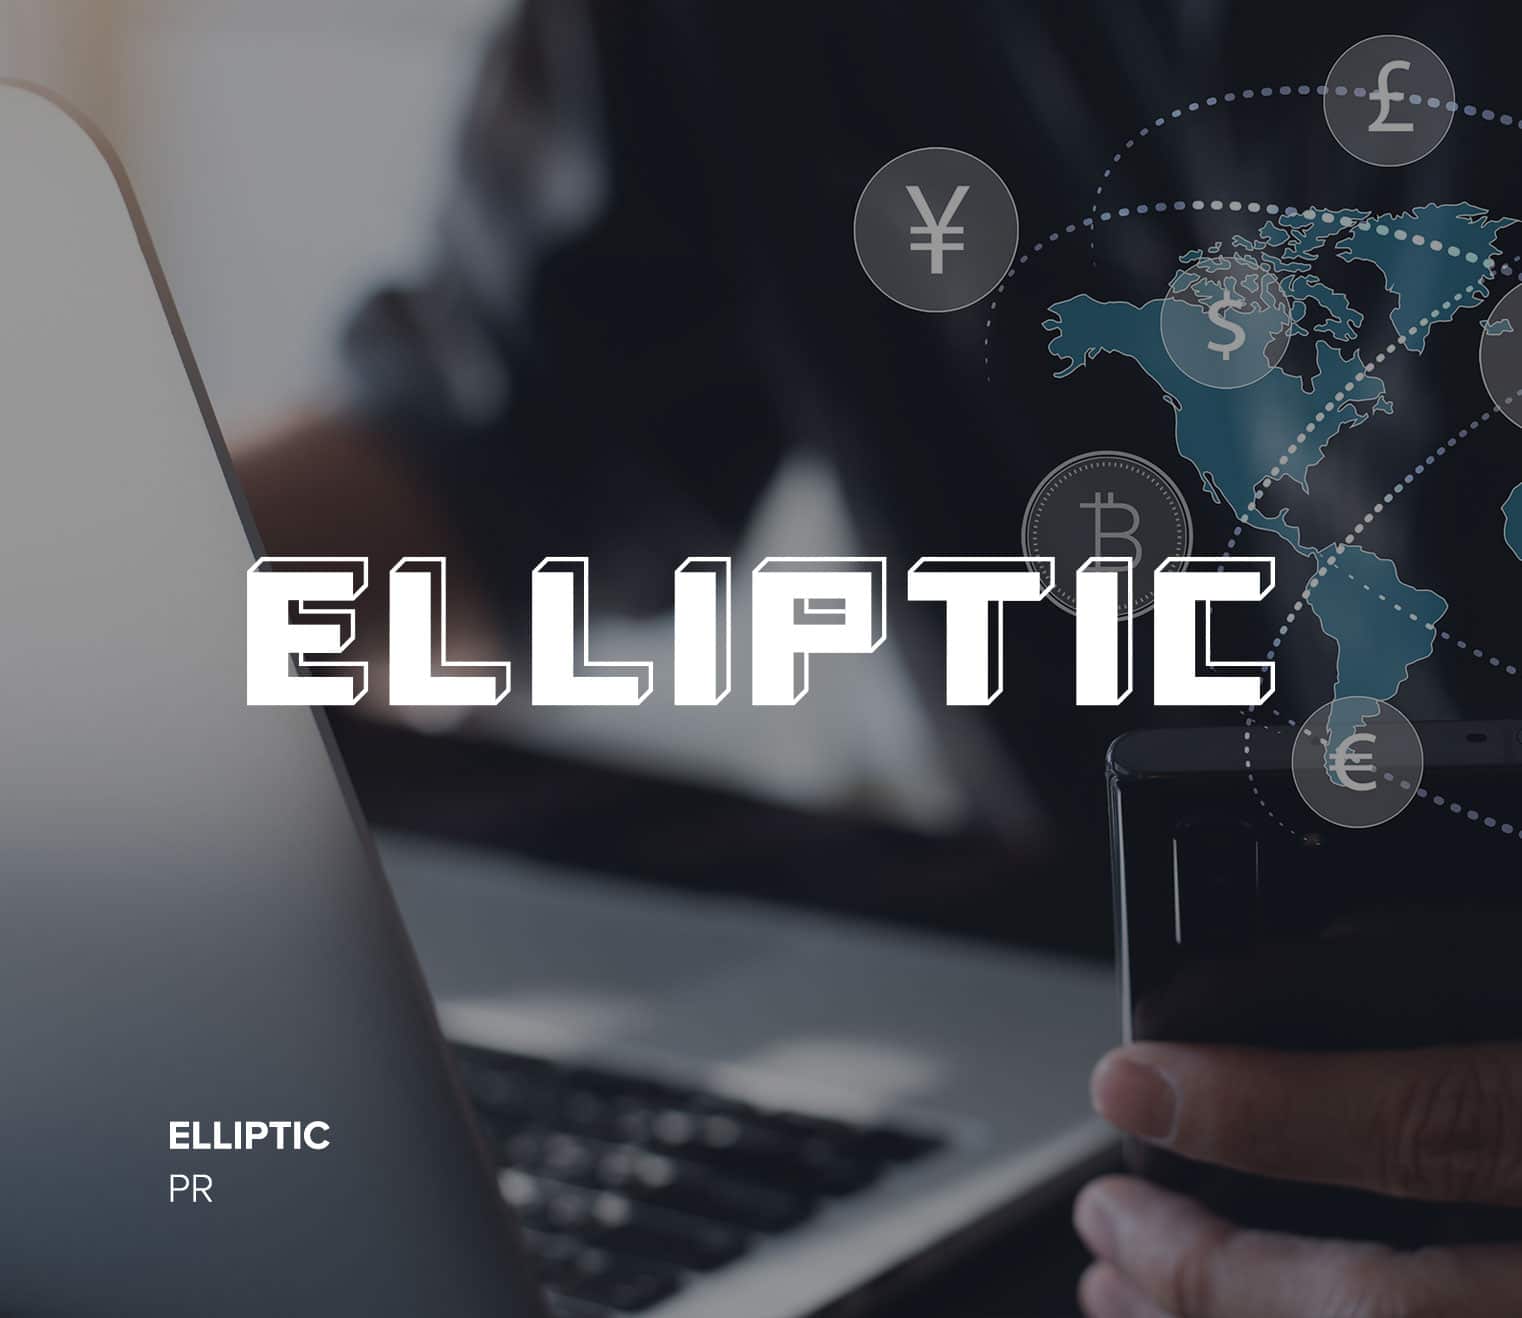 Elliptic logo in white over a collage image of a person at a laptop holding a mobile phone, with a map of the western hemisphere and symbols for various world currencies.